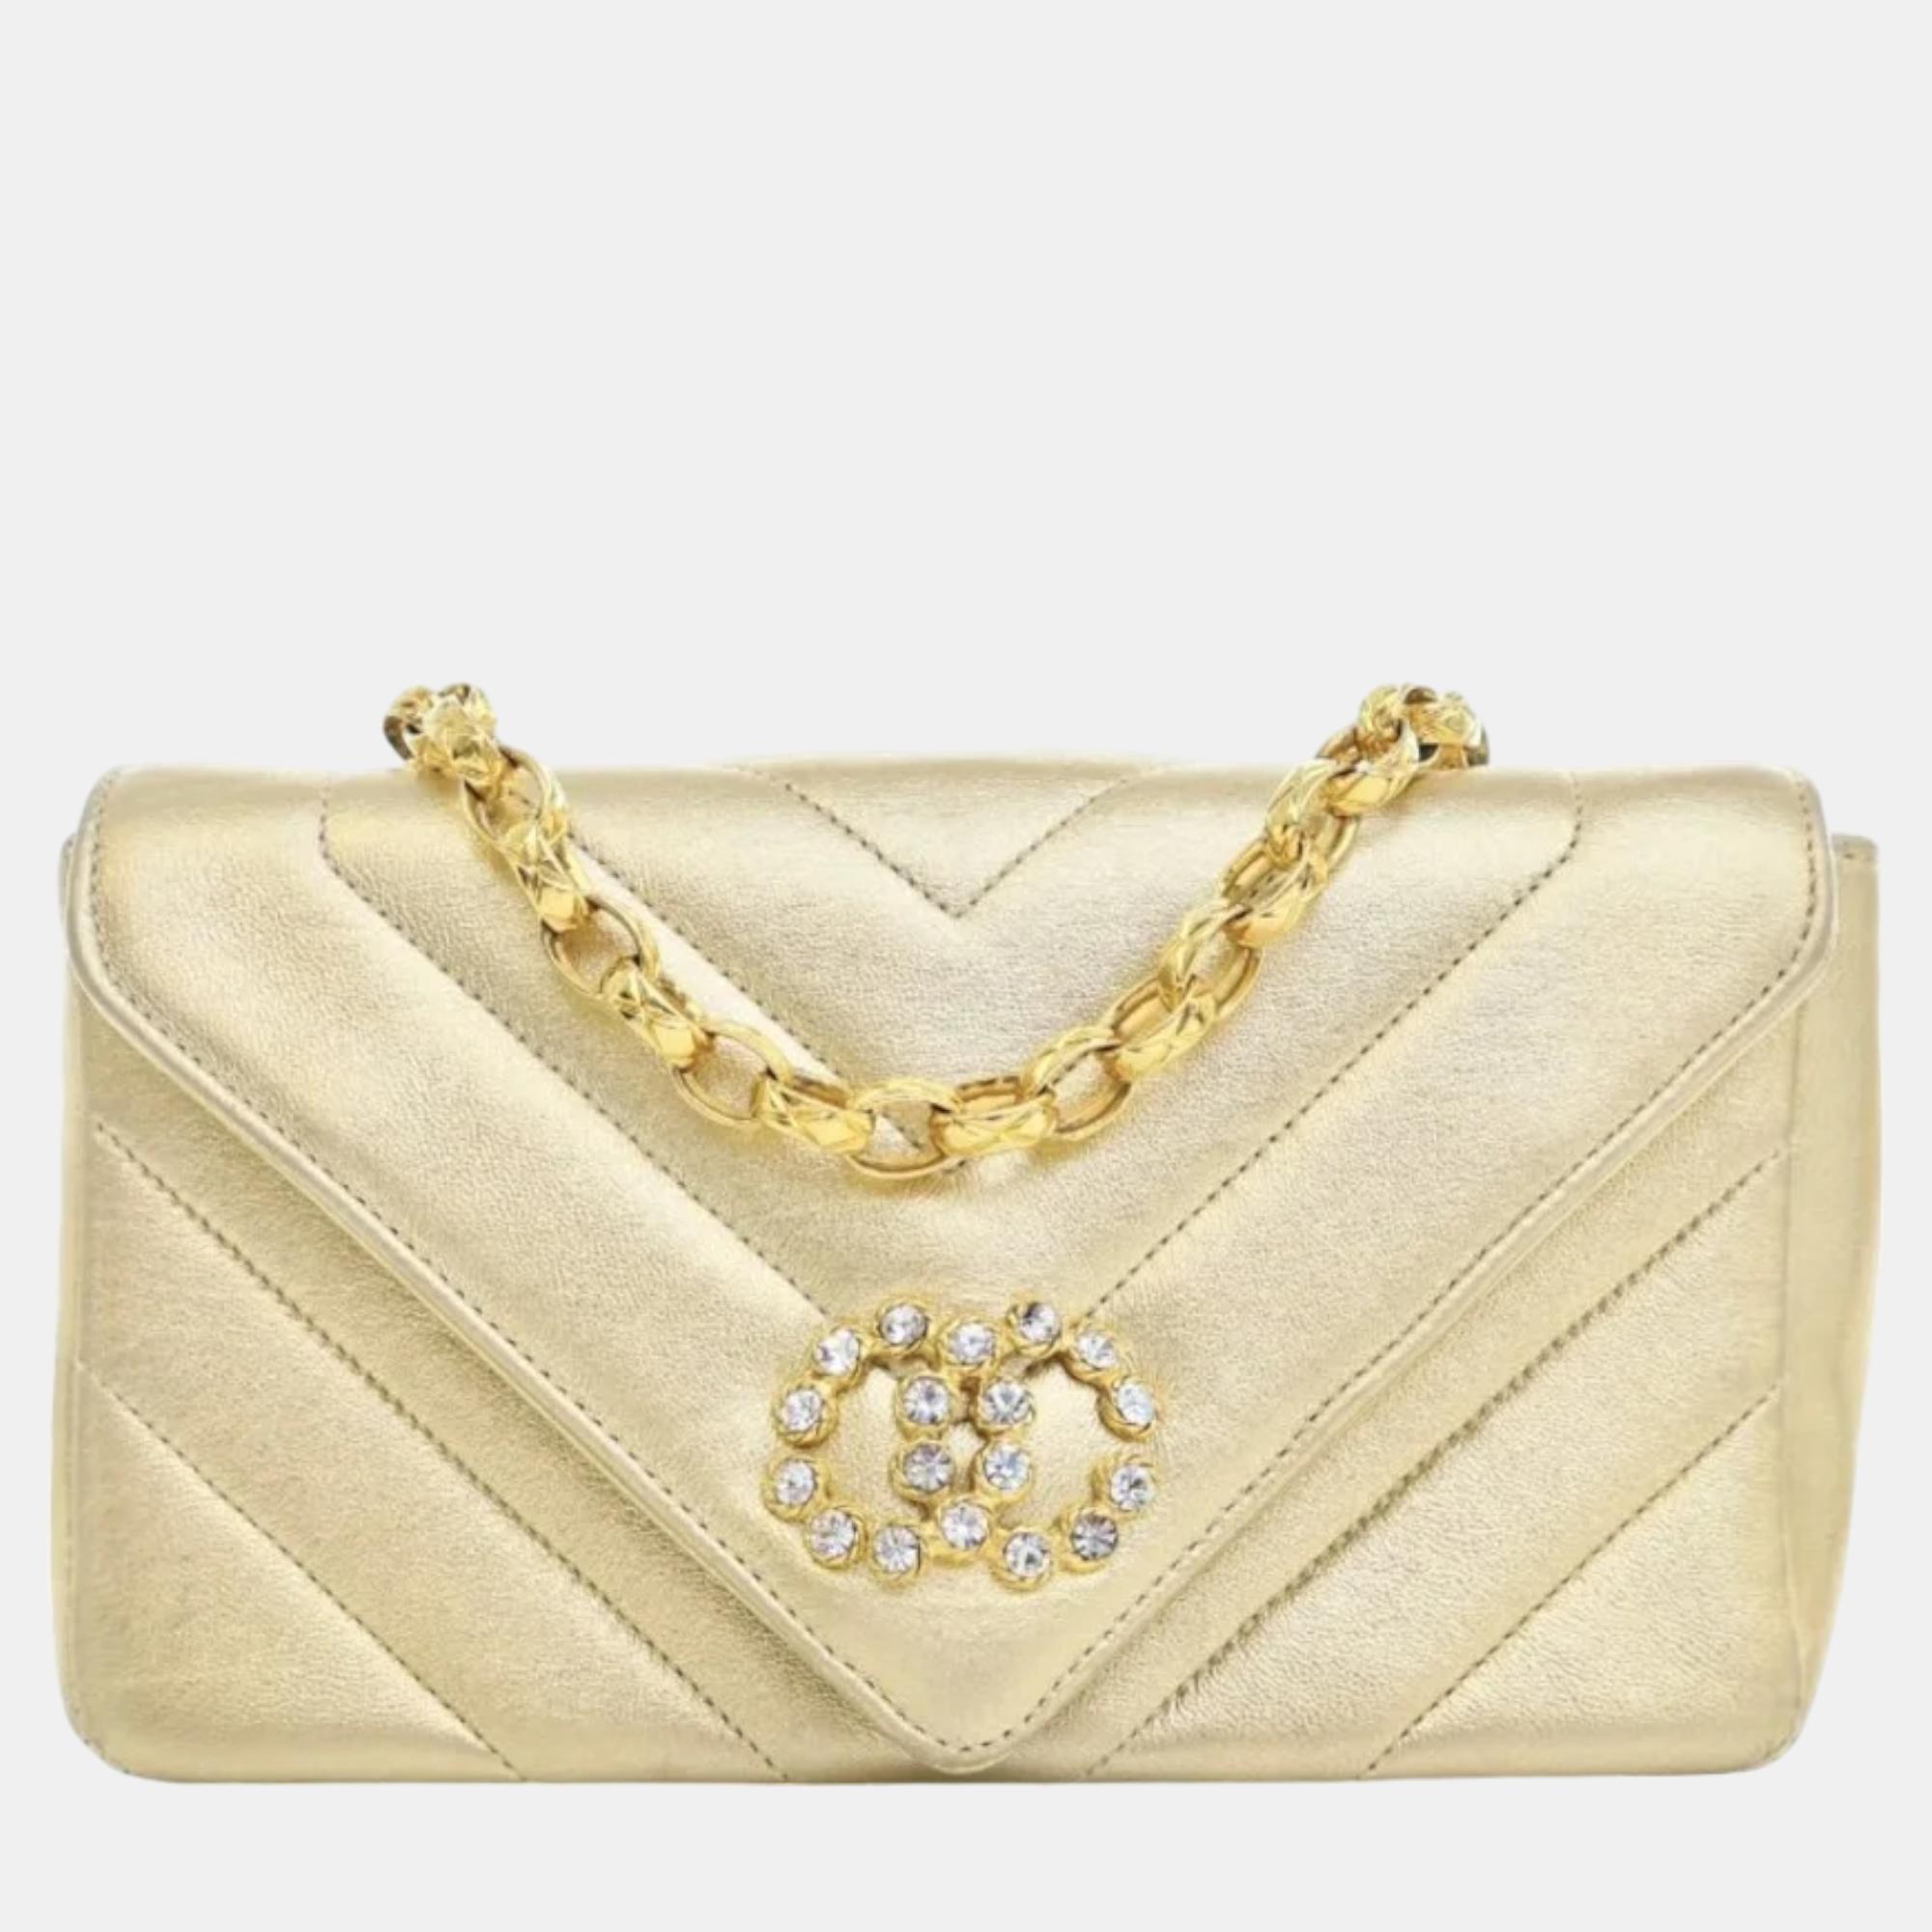 Chanel metallic gold lambskin leather small  faux pearl v stitch shoulder bag